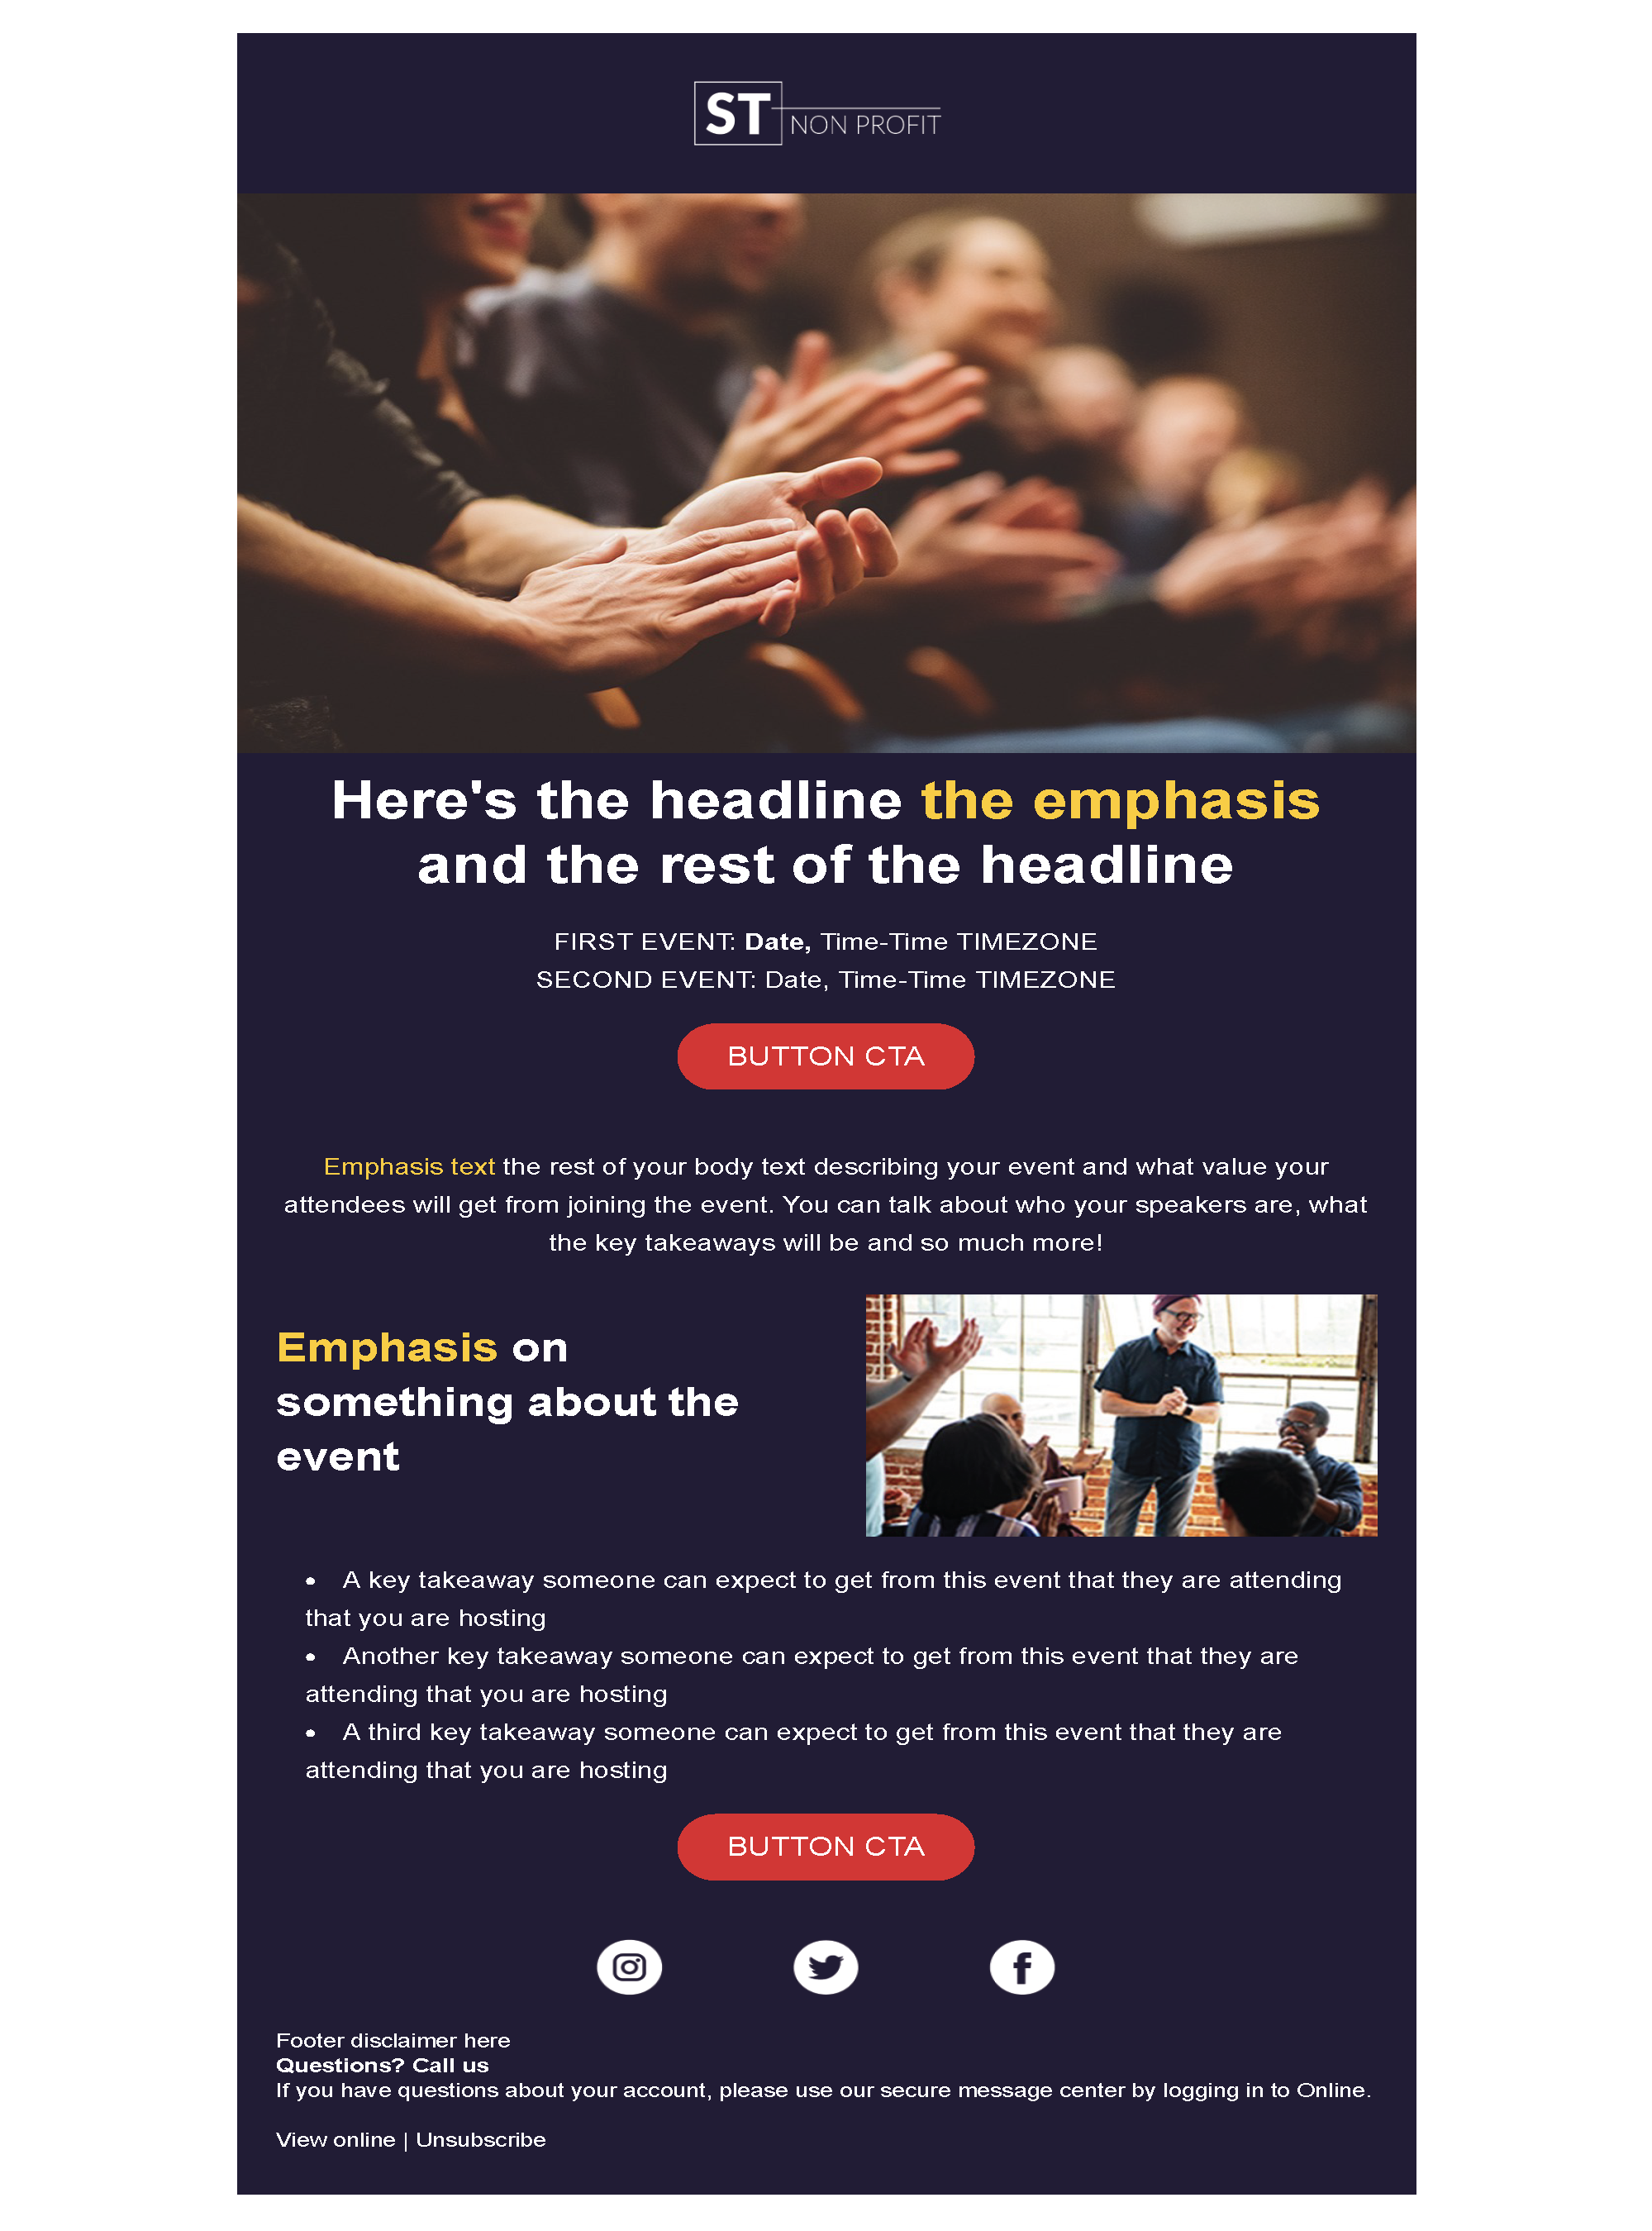 Event email template 1 for Non Profits